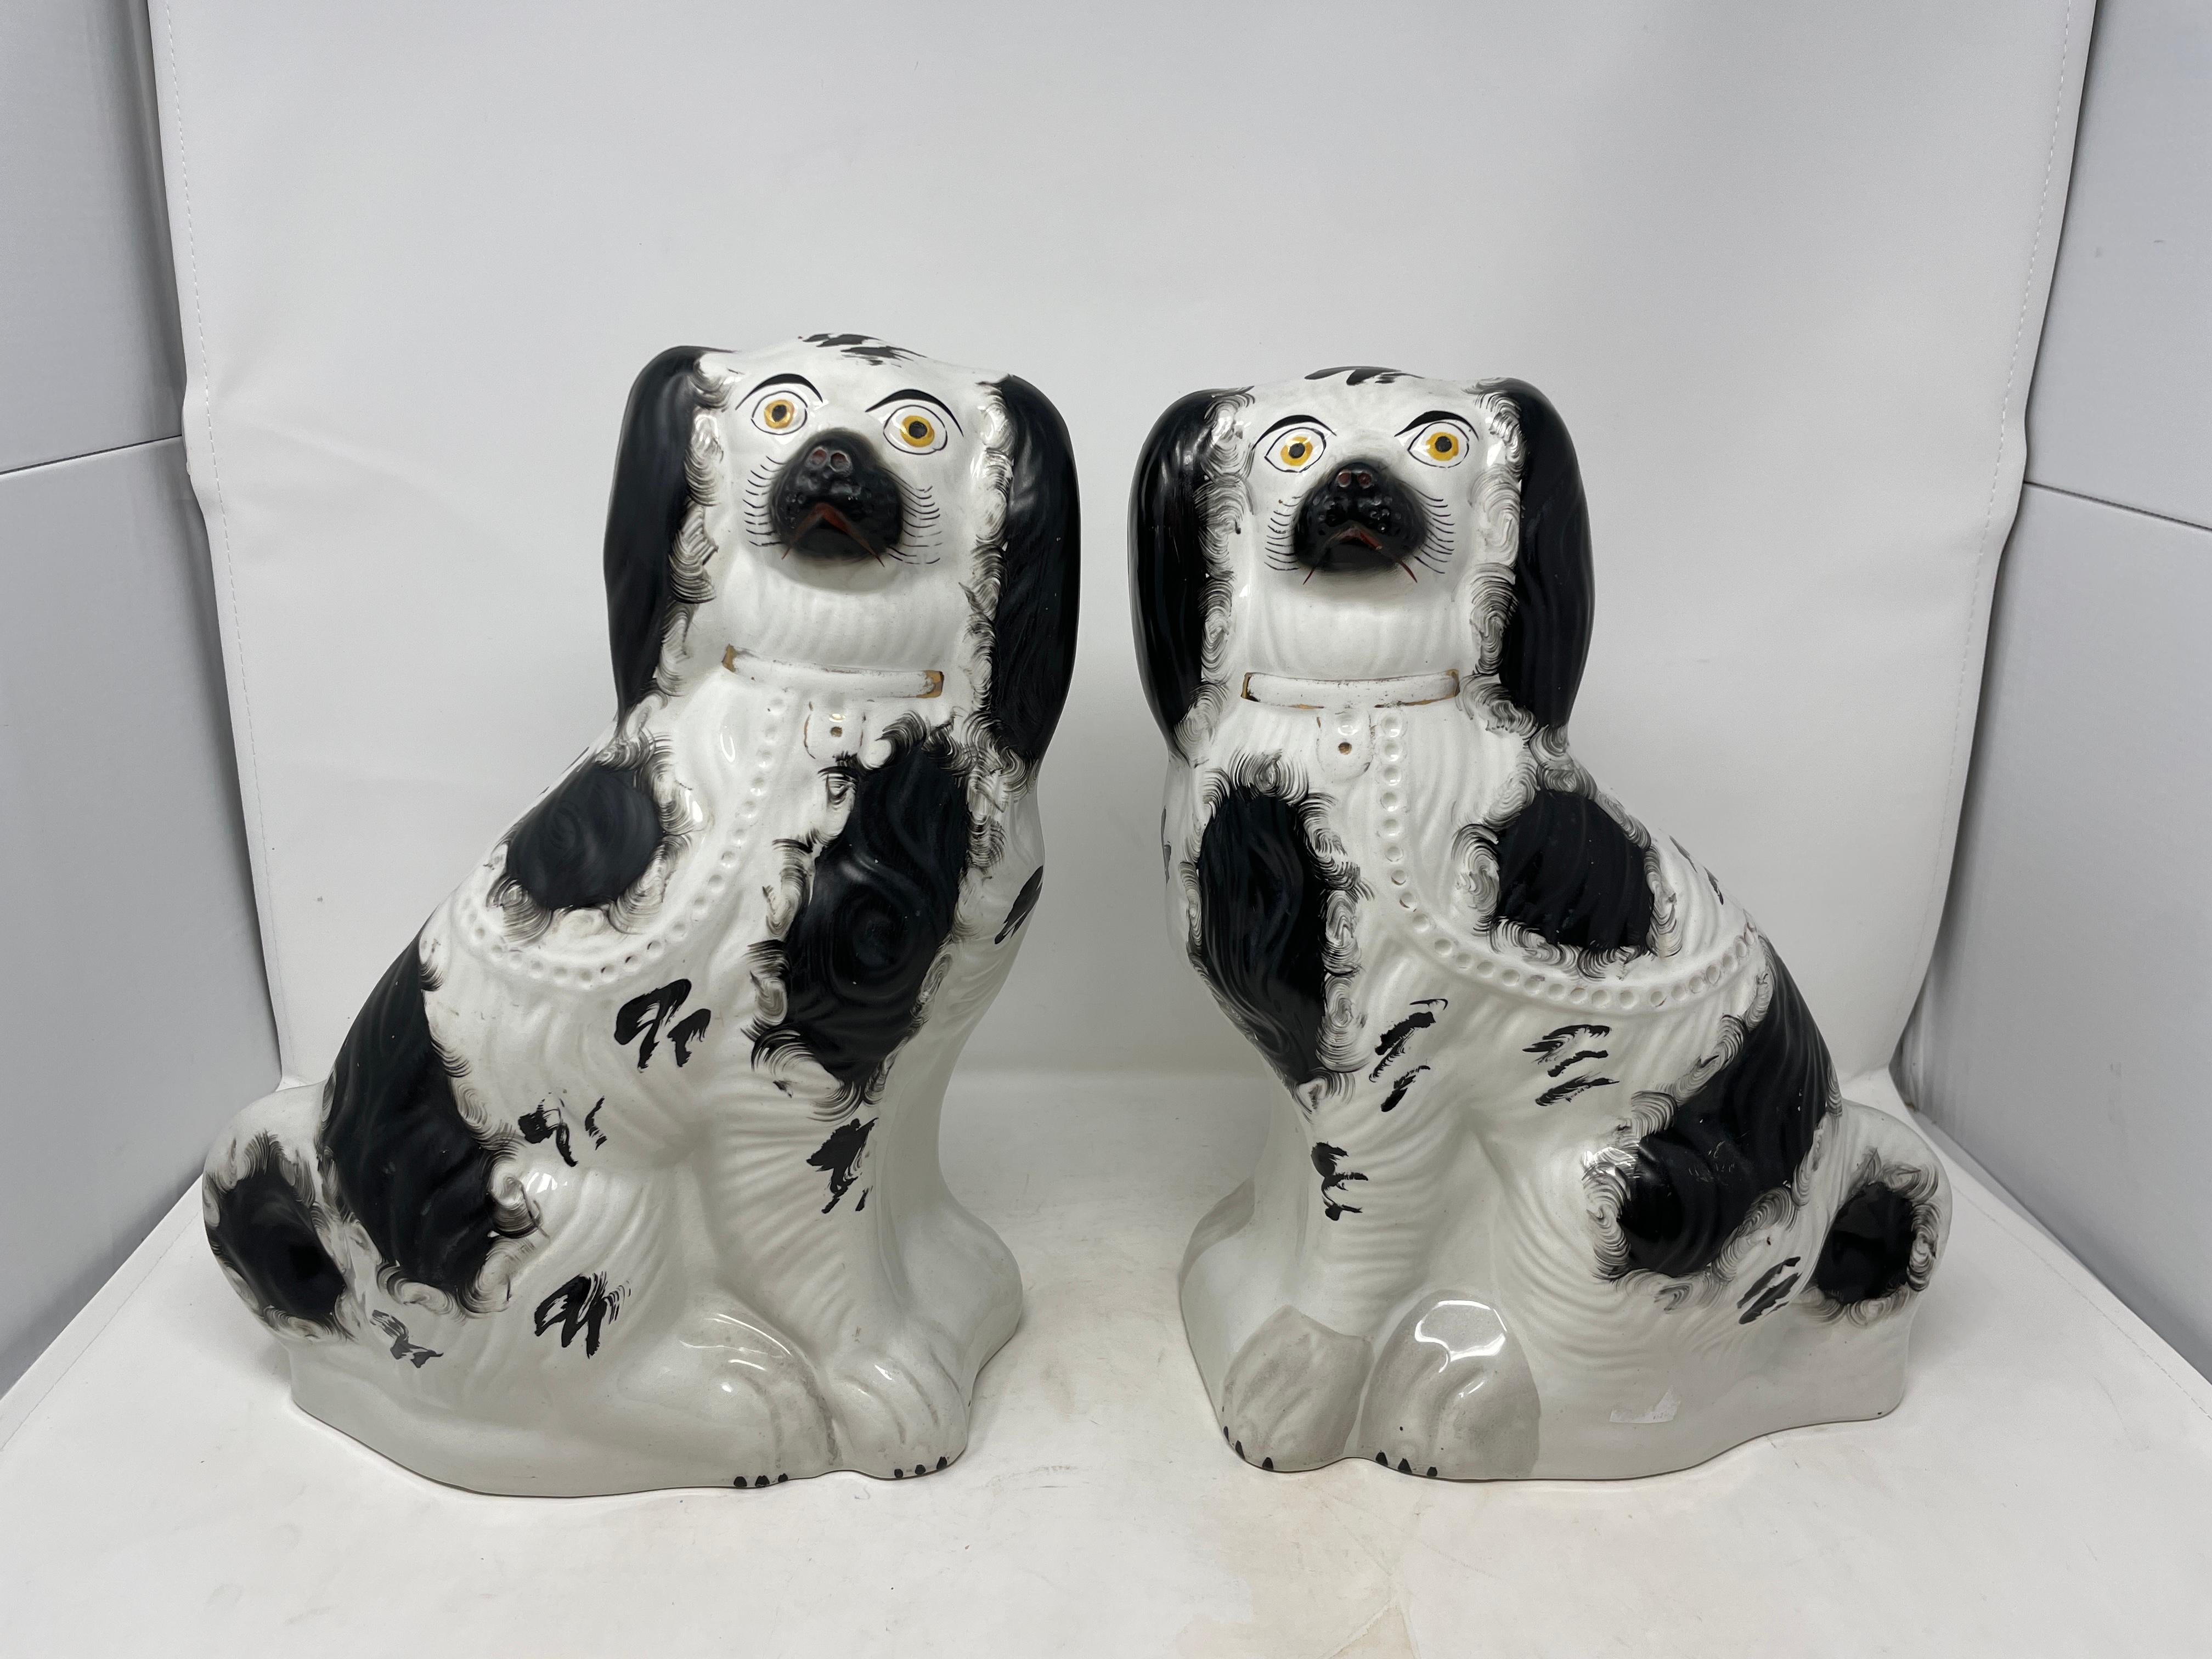 Rare & large pair Antique English black and white Staffordshire Porcelain King Charles Spaniel dogs, circa 1880-1890.
Last two photos show the larger scale of the dogs.